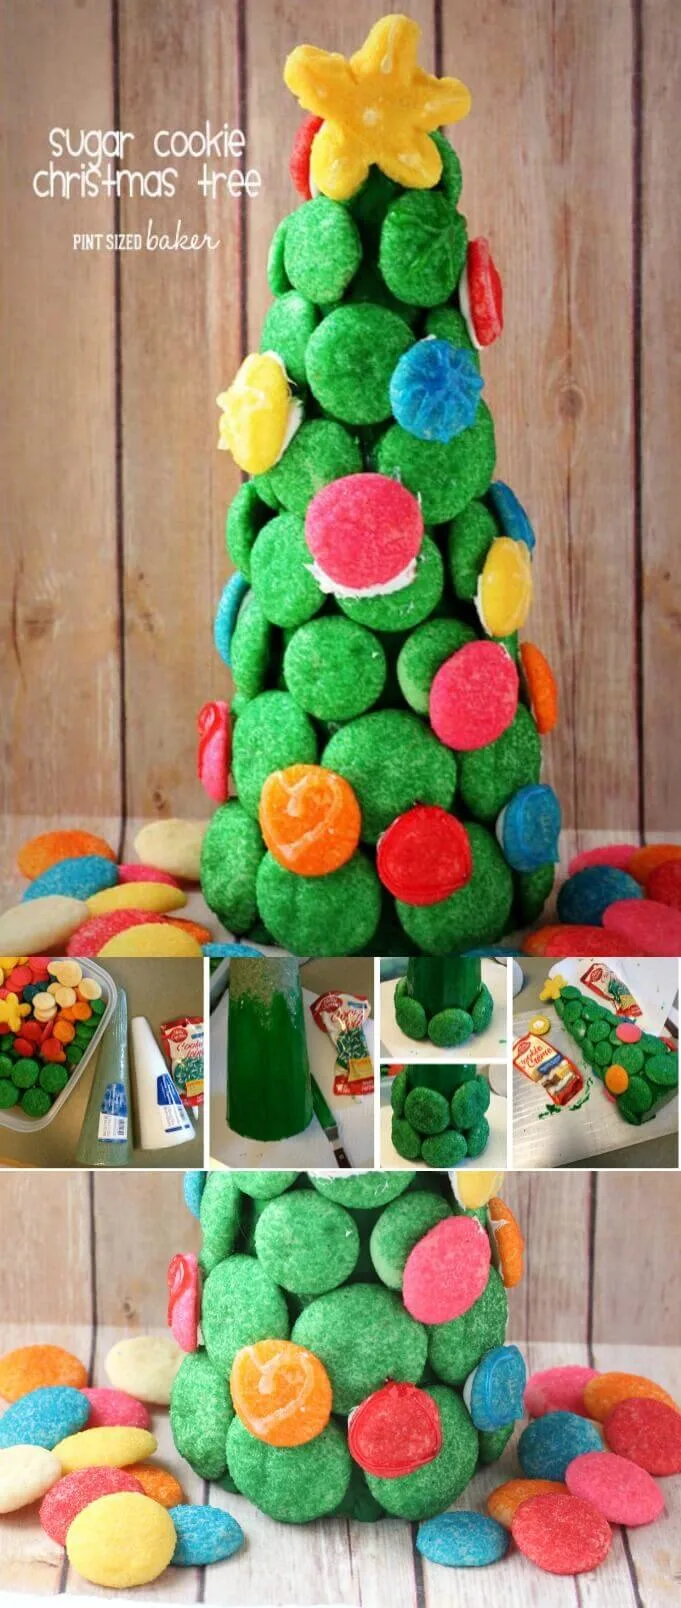 Learn how easy it is to make this beautiful Sugar Cookie Tree with your kids. It's a great accessory to a gingerbread house!